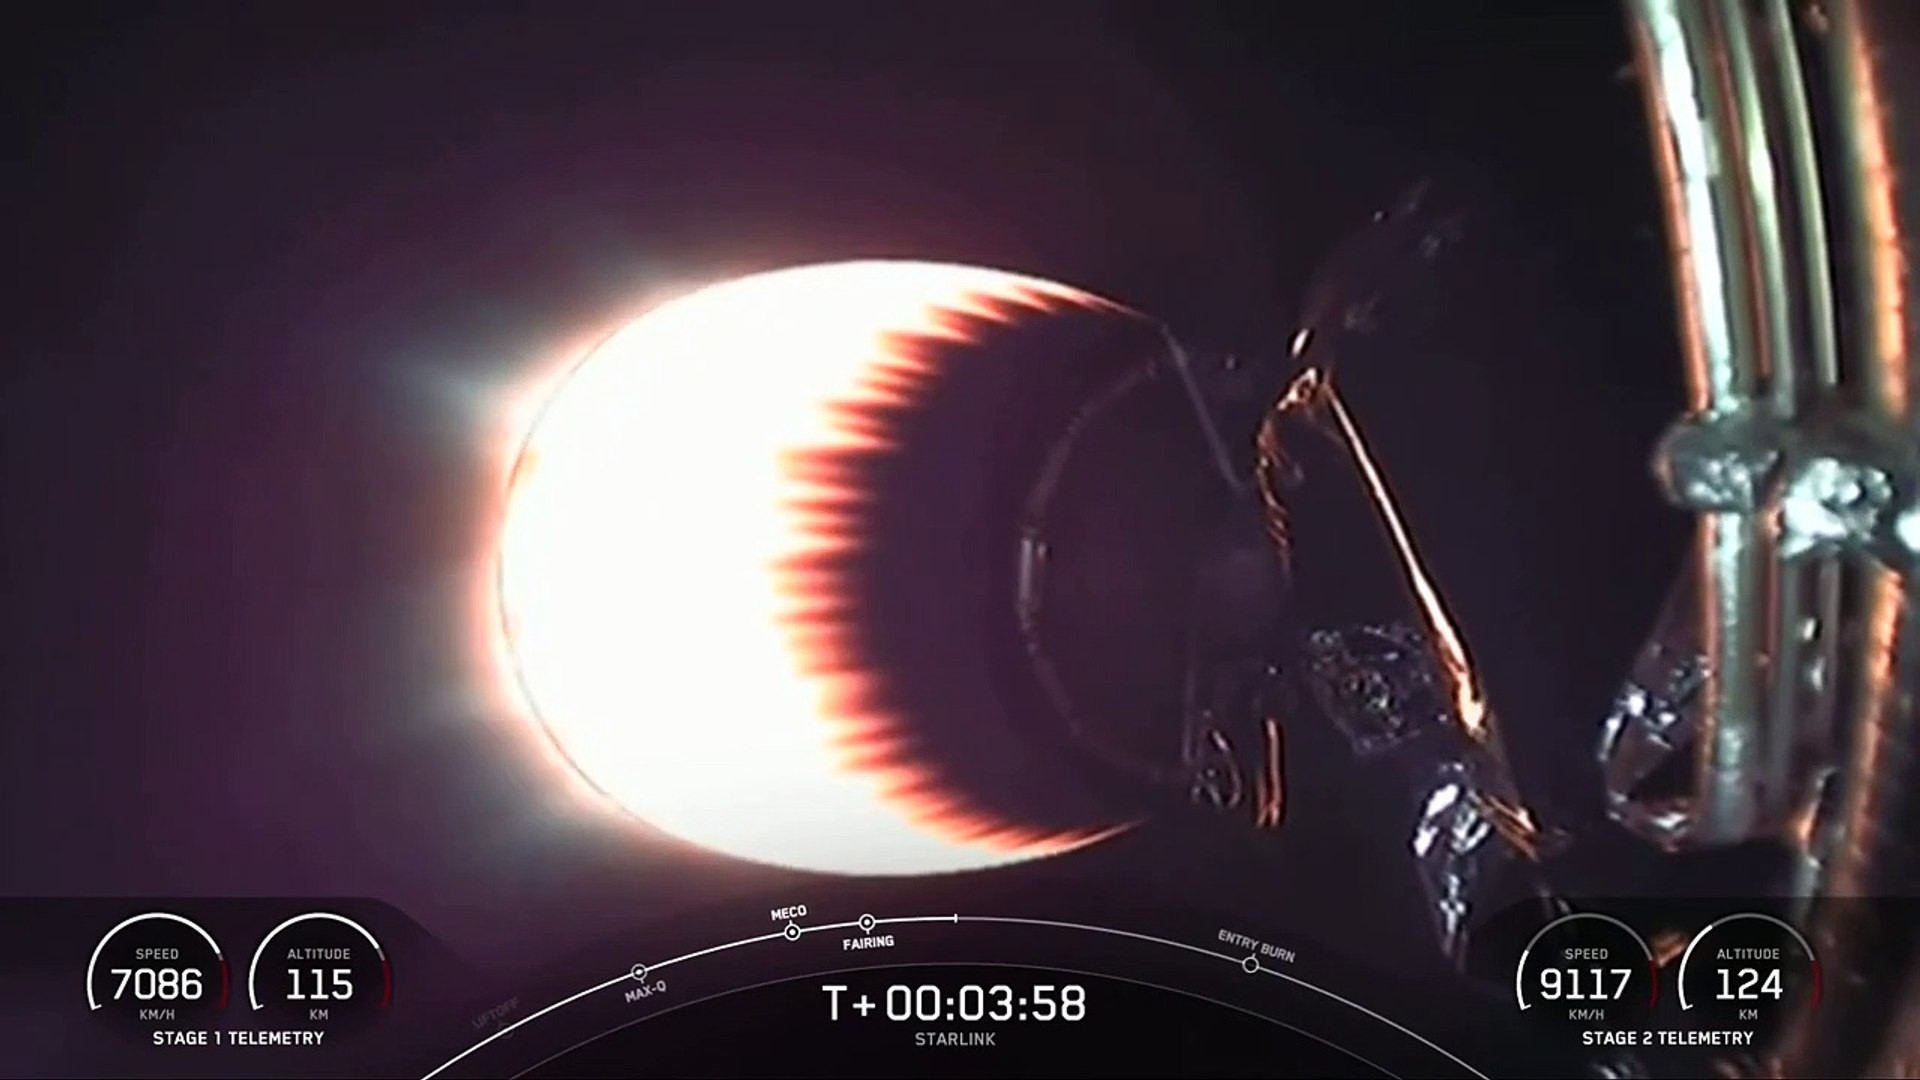 SpaceX Starlink-20 Launches into orbit!